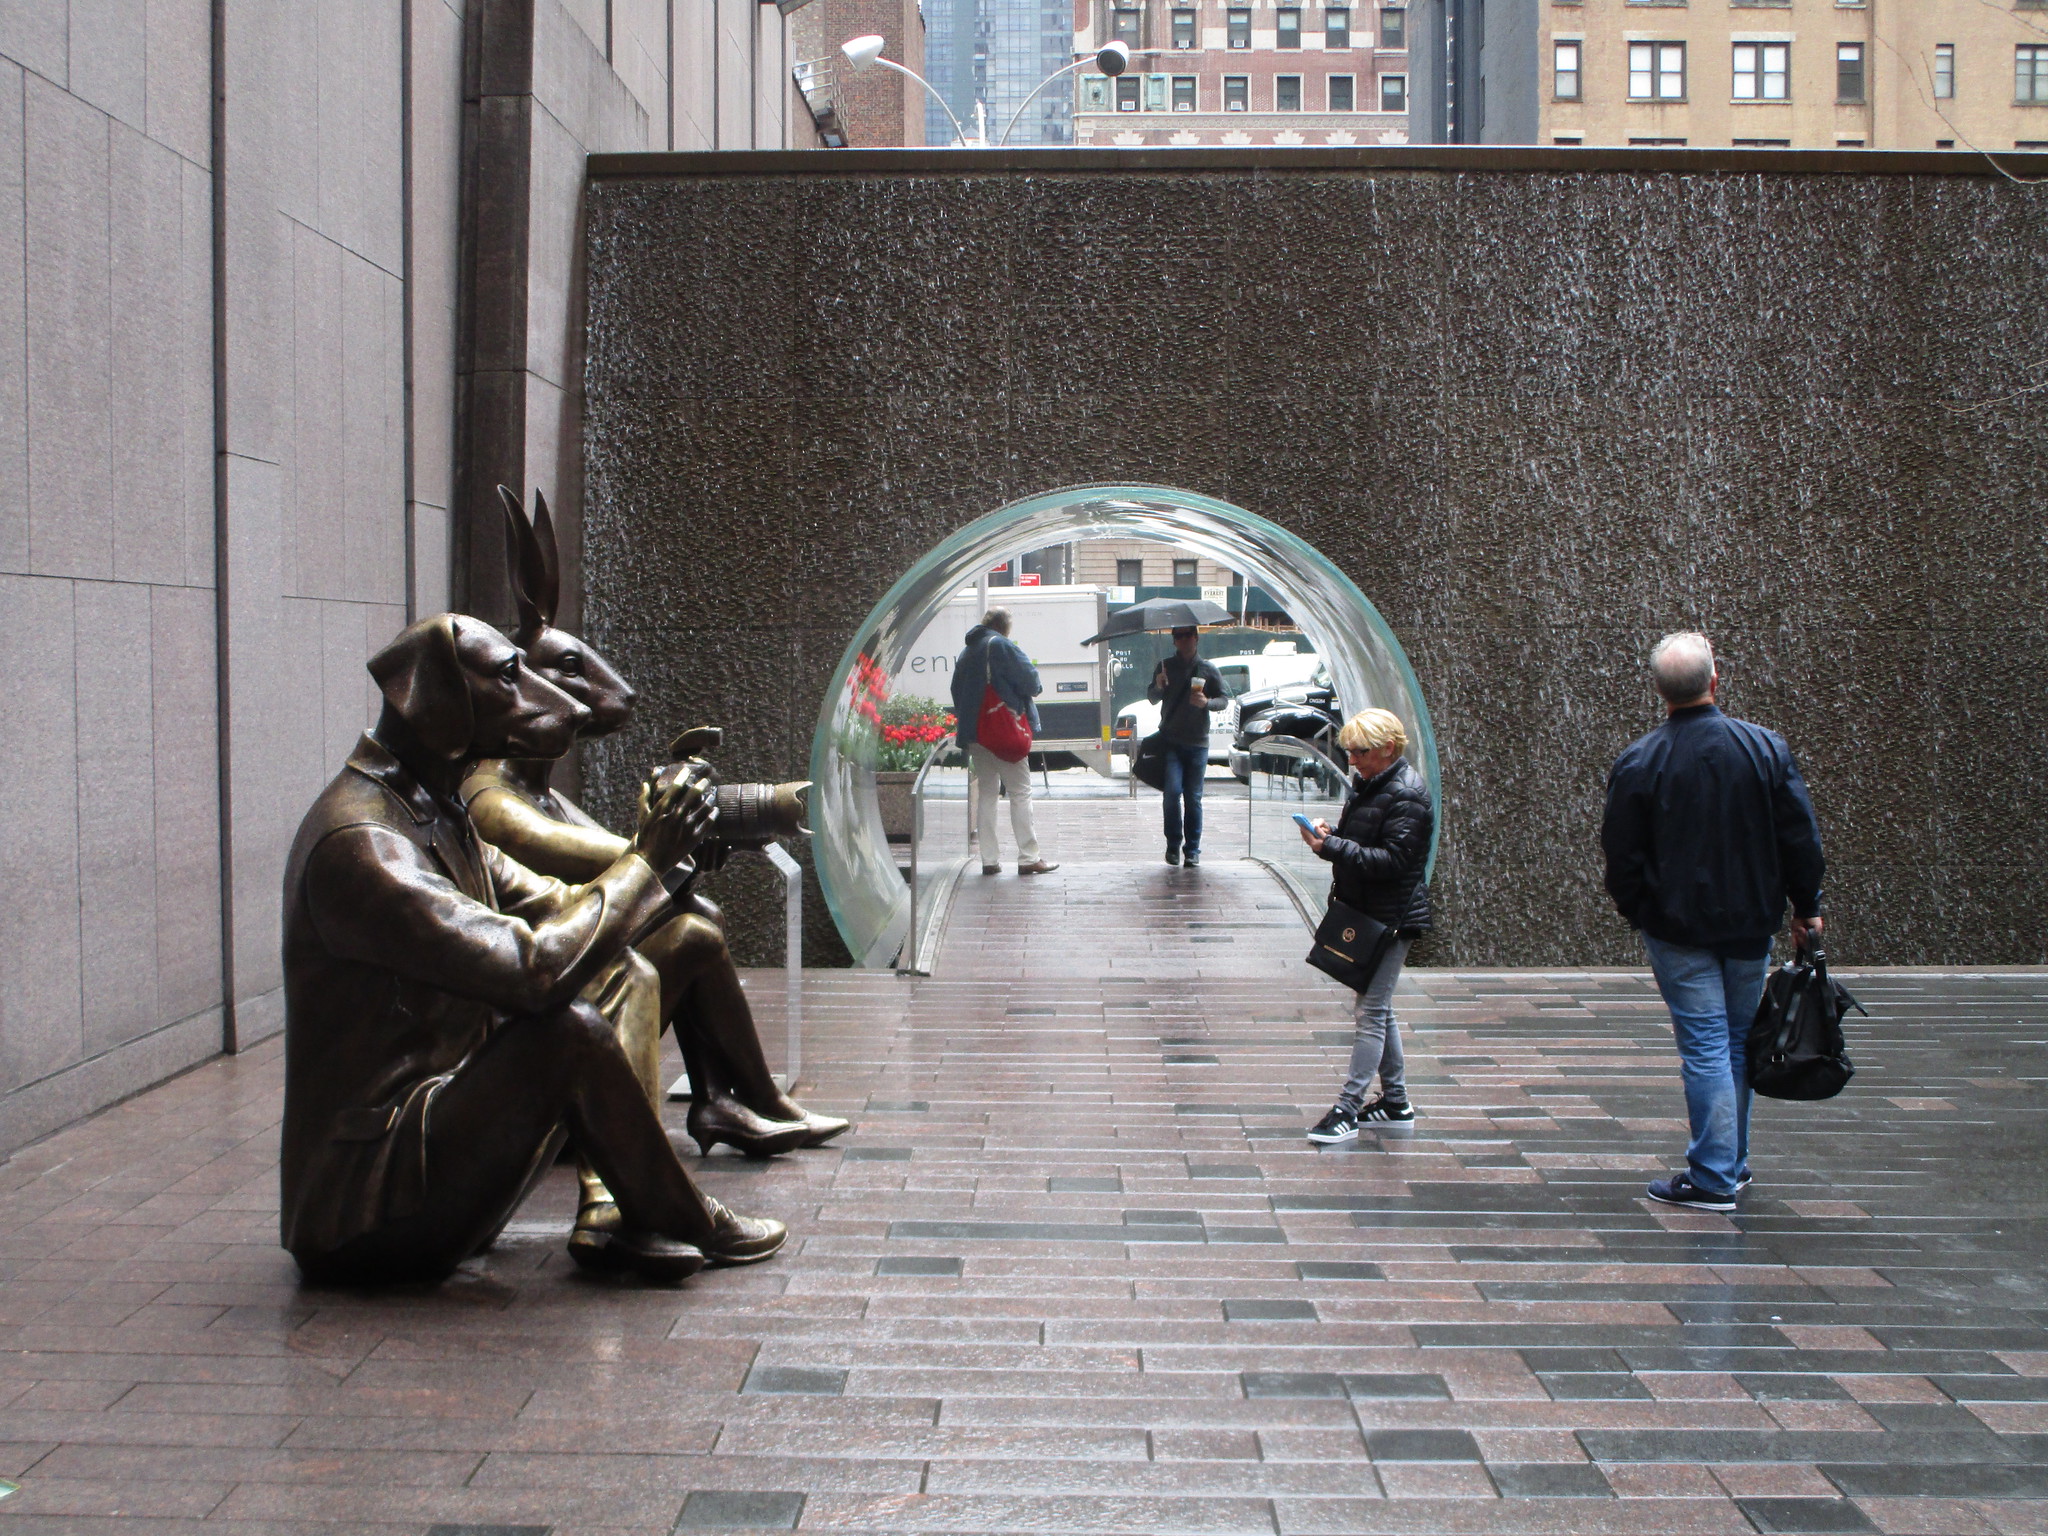 <p>New York’s Glass Waterfall is nestled onto one side of the McGraw-Hill building in New York—not far from Times Square.</p><p>Stand inside the glass tunnel and watch the waterfall flow over you—while staying dry.</p><p><strong>Features:</strong> Tourist photo-op</p><p>Brecht Bug, Flickr</p>